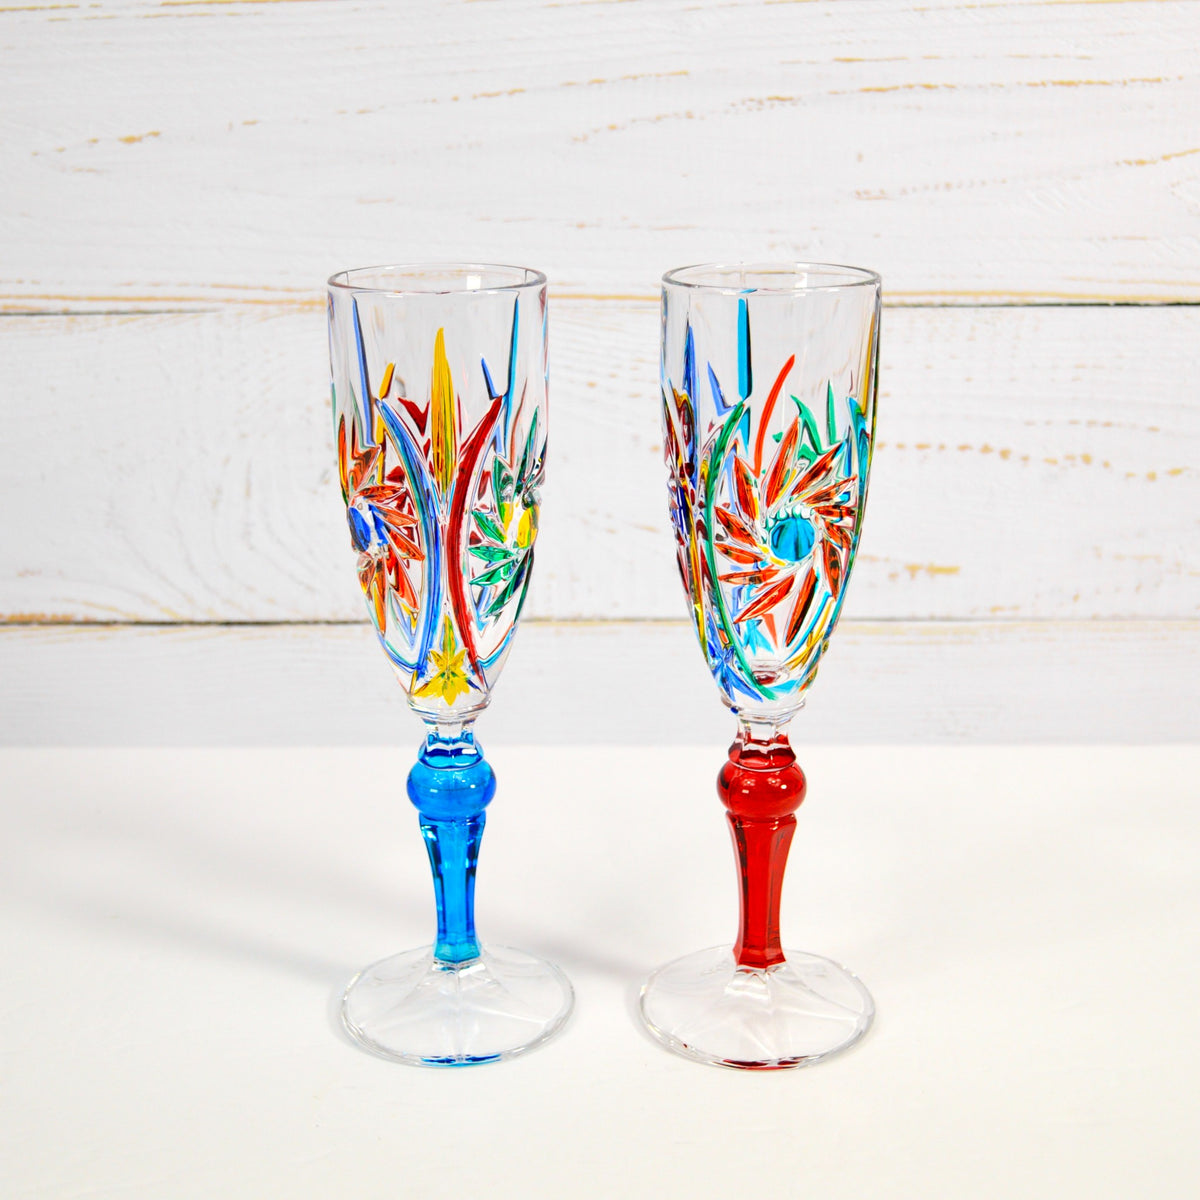 Twizzler Champagne Glasses, Set of 2, Made in Italy - My Italian Decor